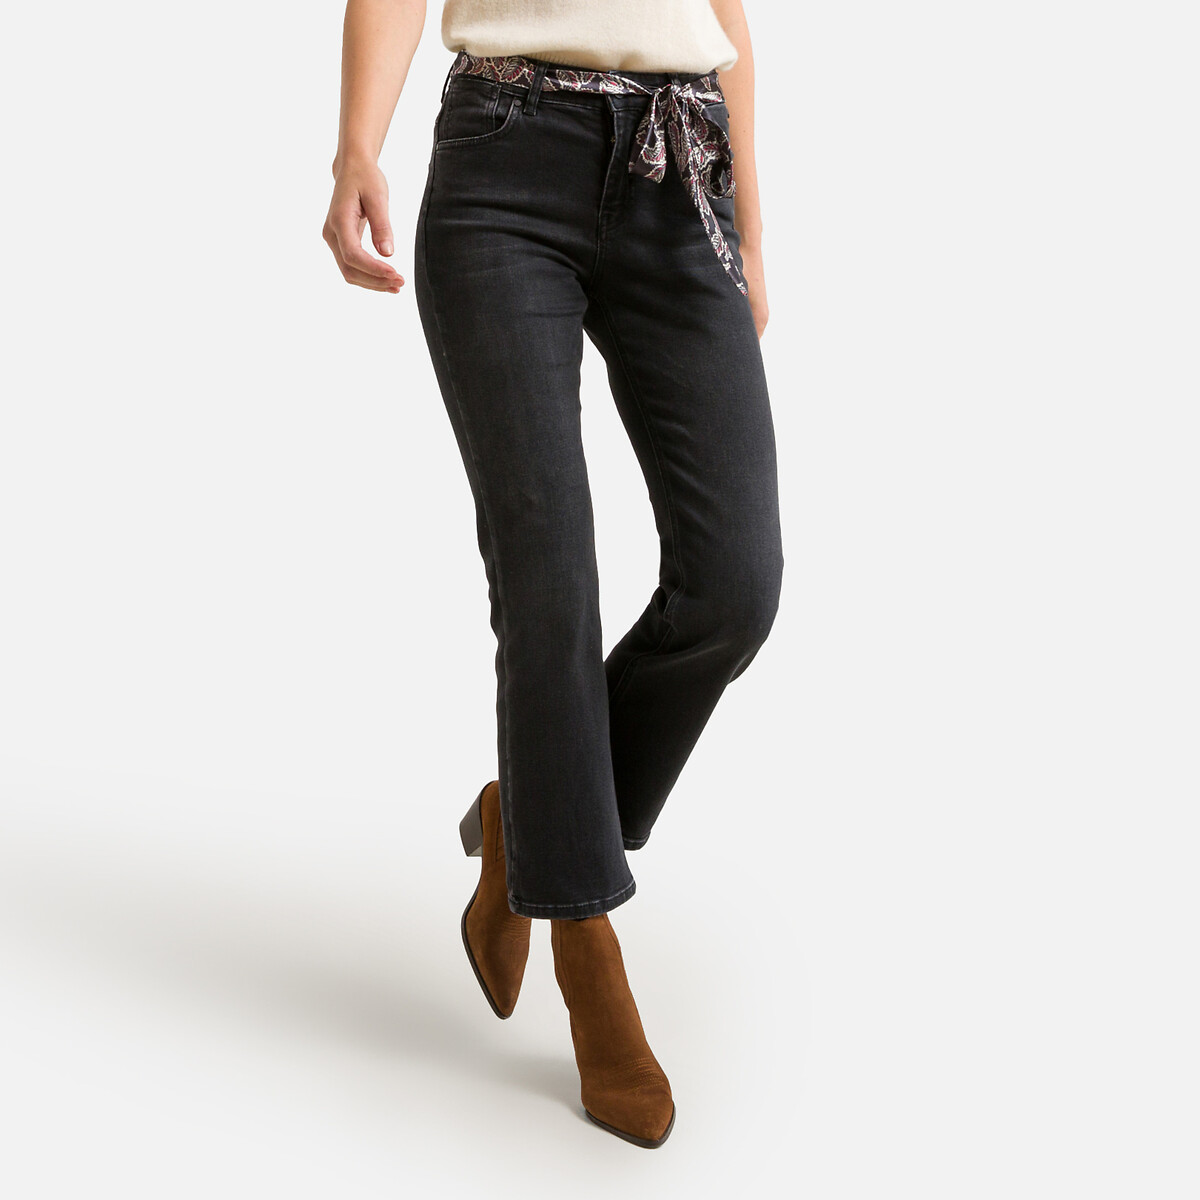 Norma S-SDM Bootcut Jeans with Scarf Belt, Length 27.5"